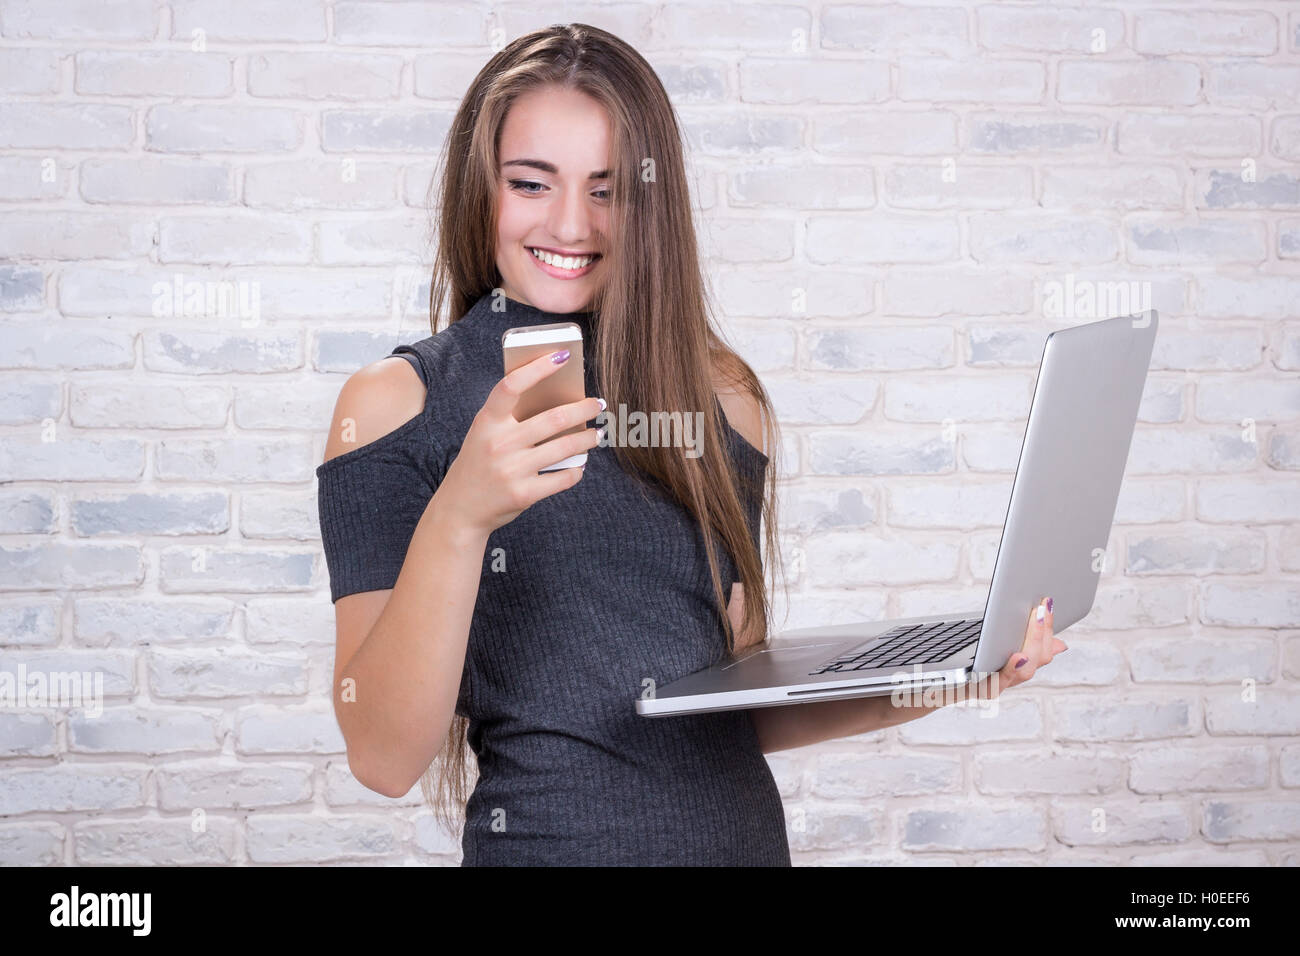 Young beautiful girl model with long hair imitates business lady, office manager or administrator with notebook and telephone Stock Photo